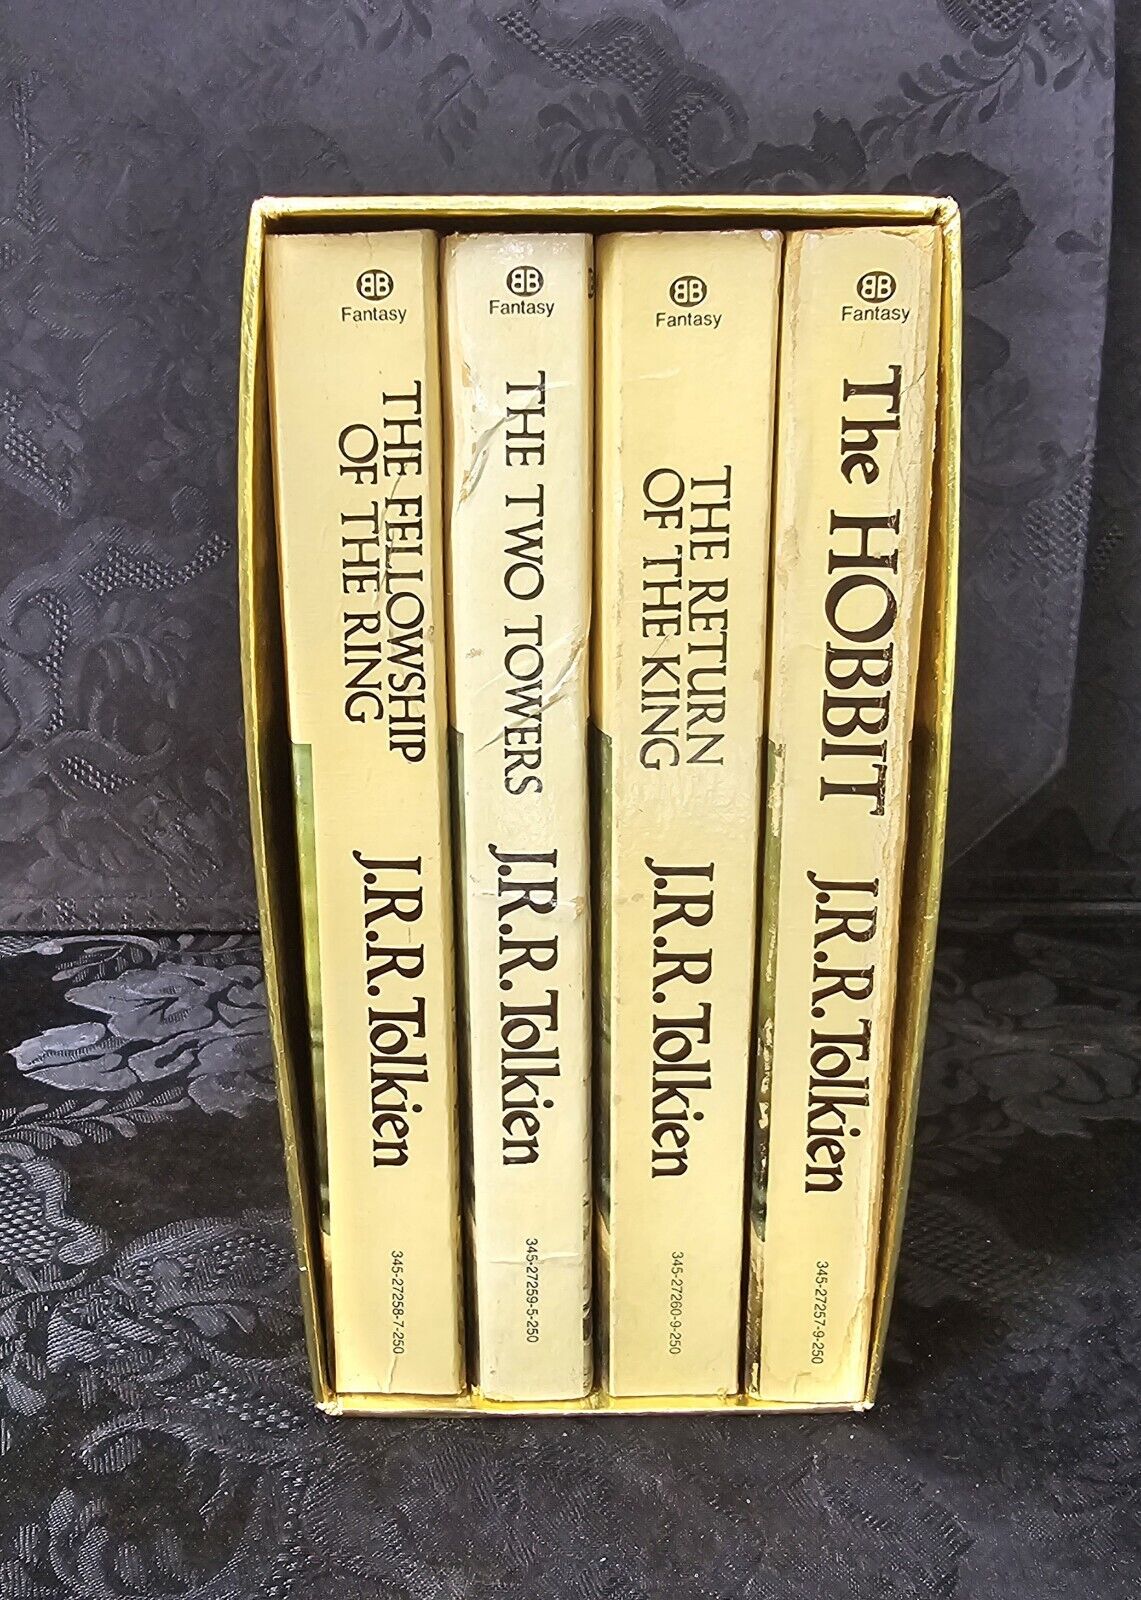 J.R.R.Tolkien - The Lord Of The Rings Book Set - Ballantine Books in case 1978